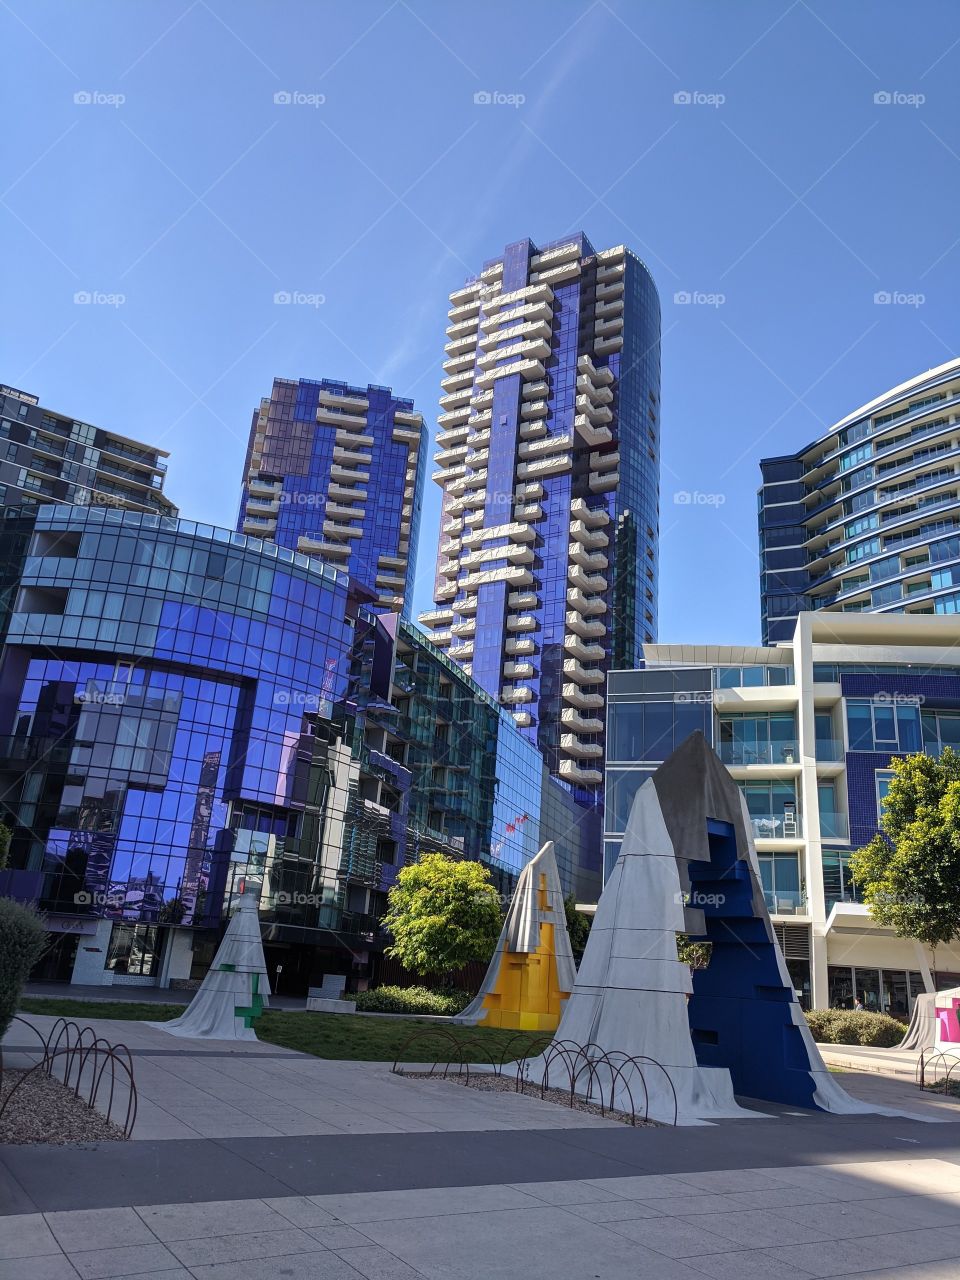 Variety of colourful shaped and interesting glass buildings in urban Melbourne